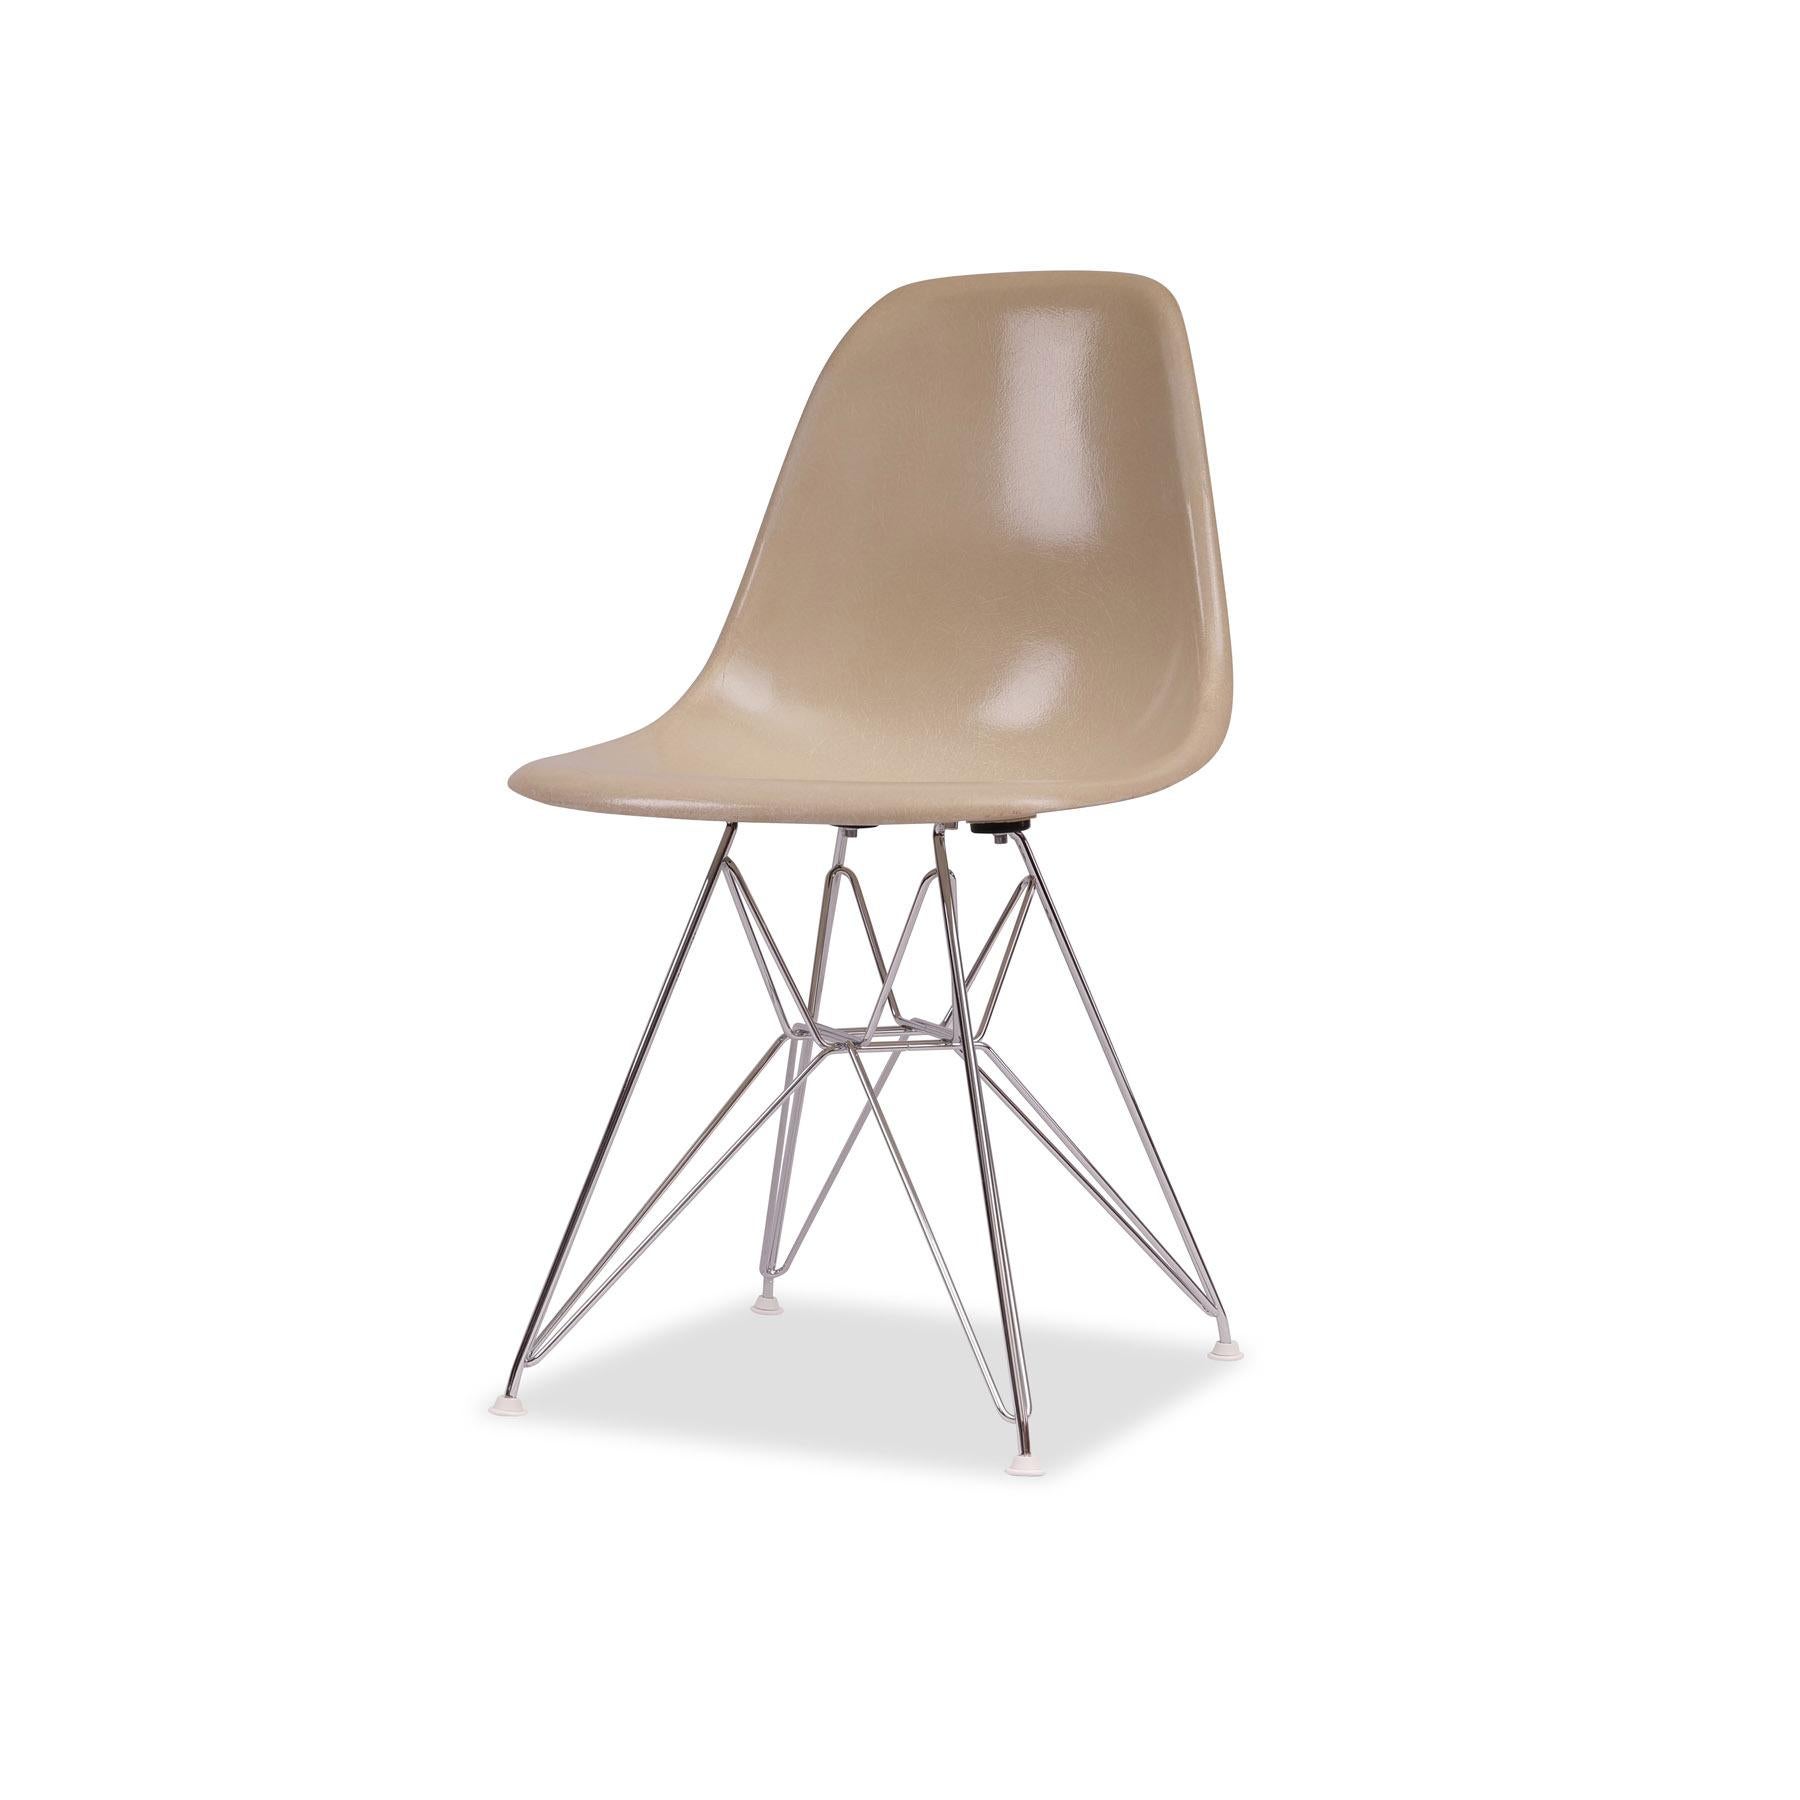 Set of 6 Charles and Ray Eames Fiberglass Sidechairs with Eiffelbase In Good Condition For Sale In Münster, DE